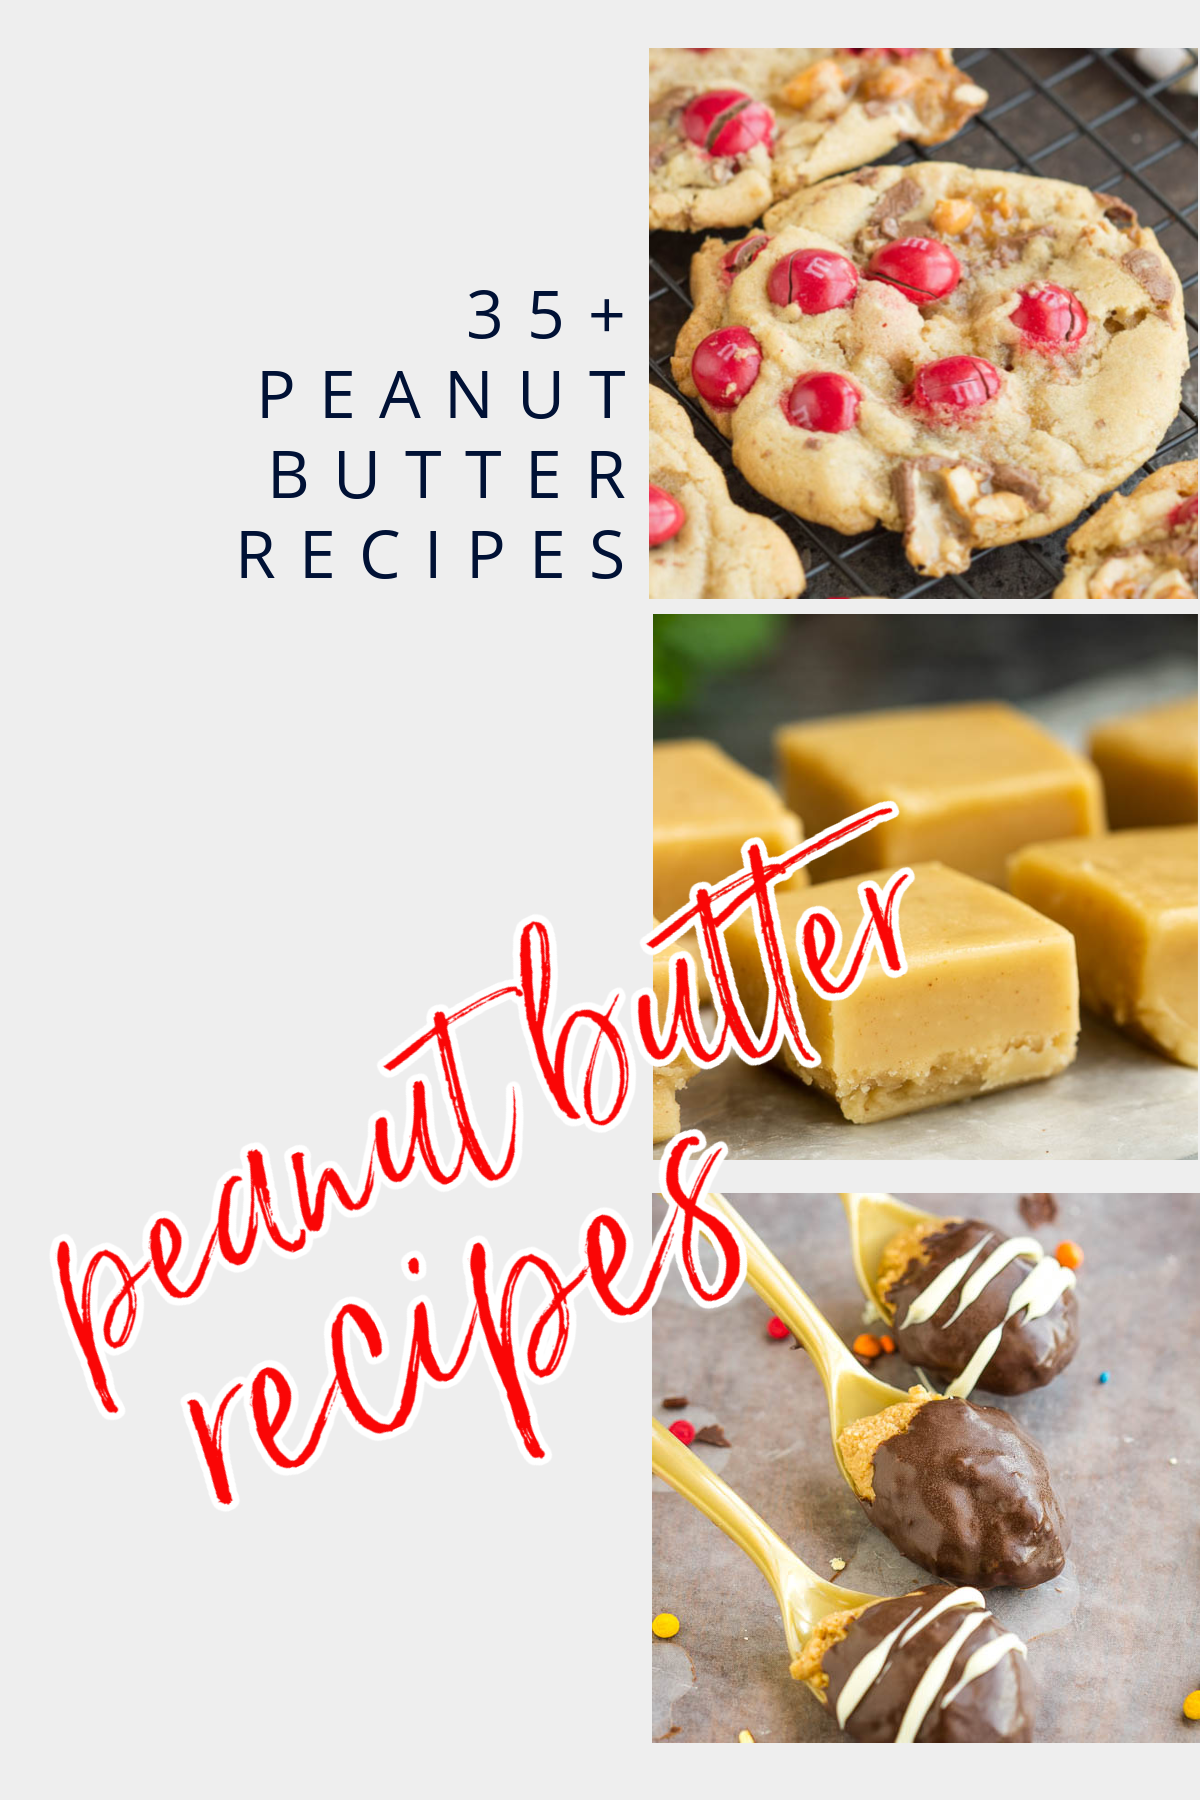 Peanut Butter Recipes You'll Go Nuts for